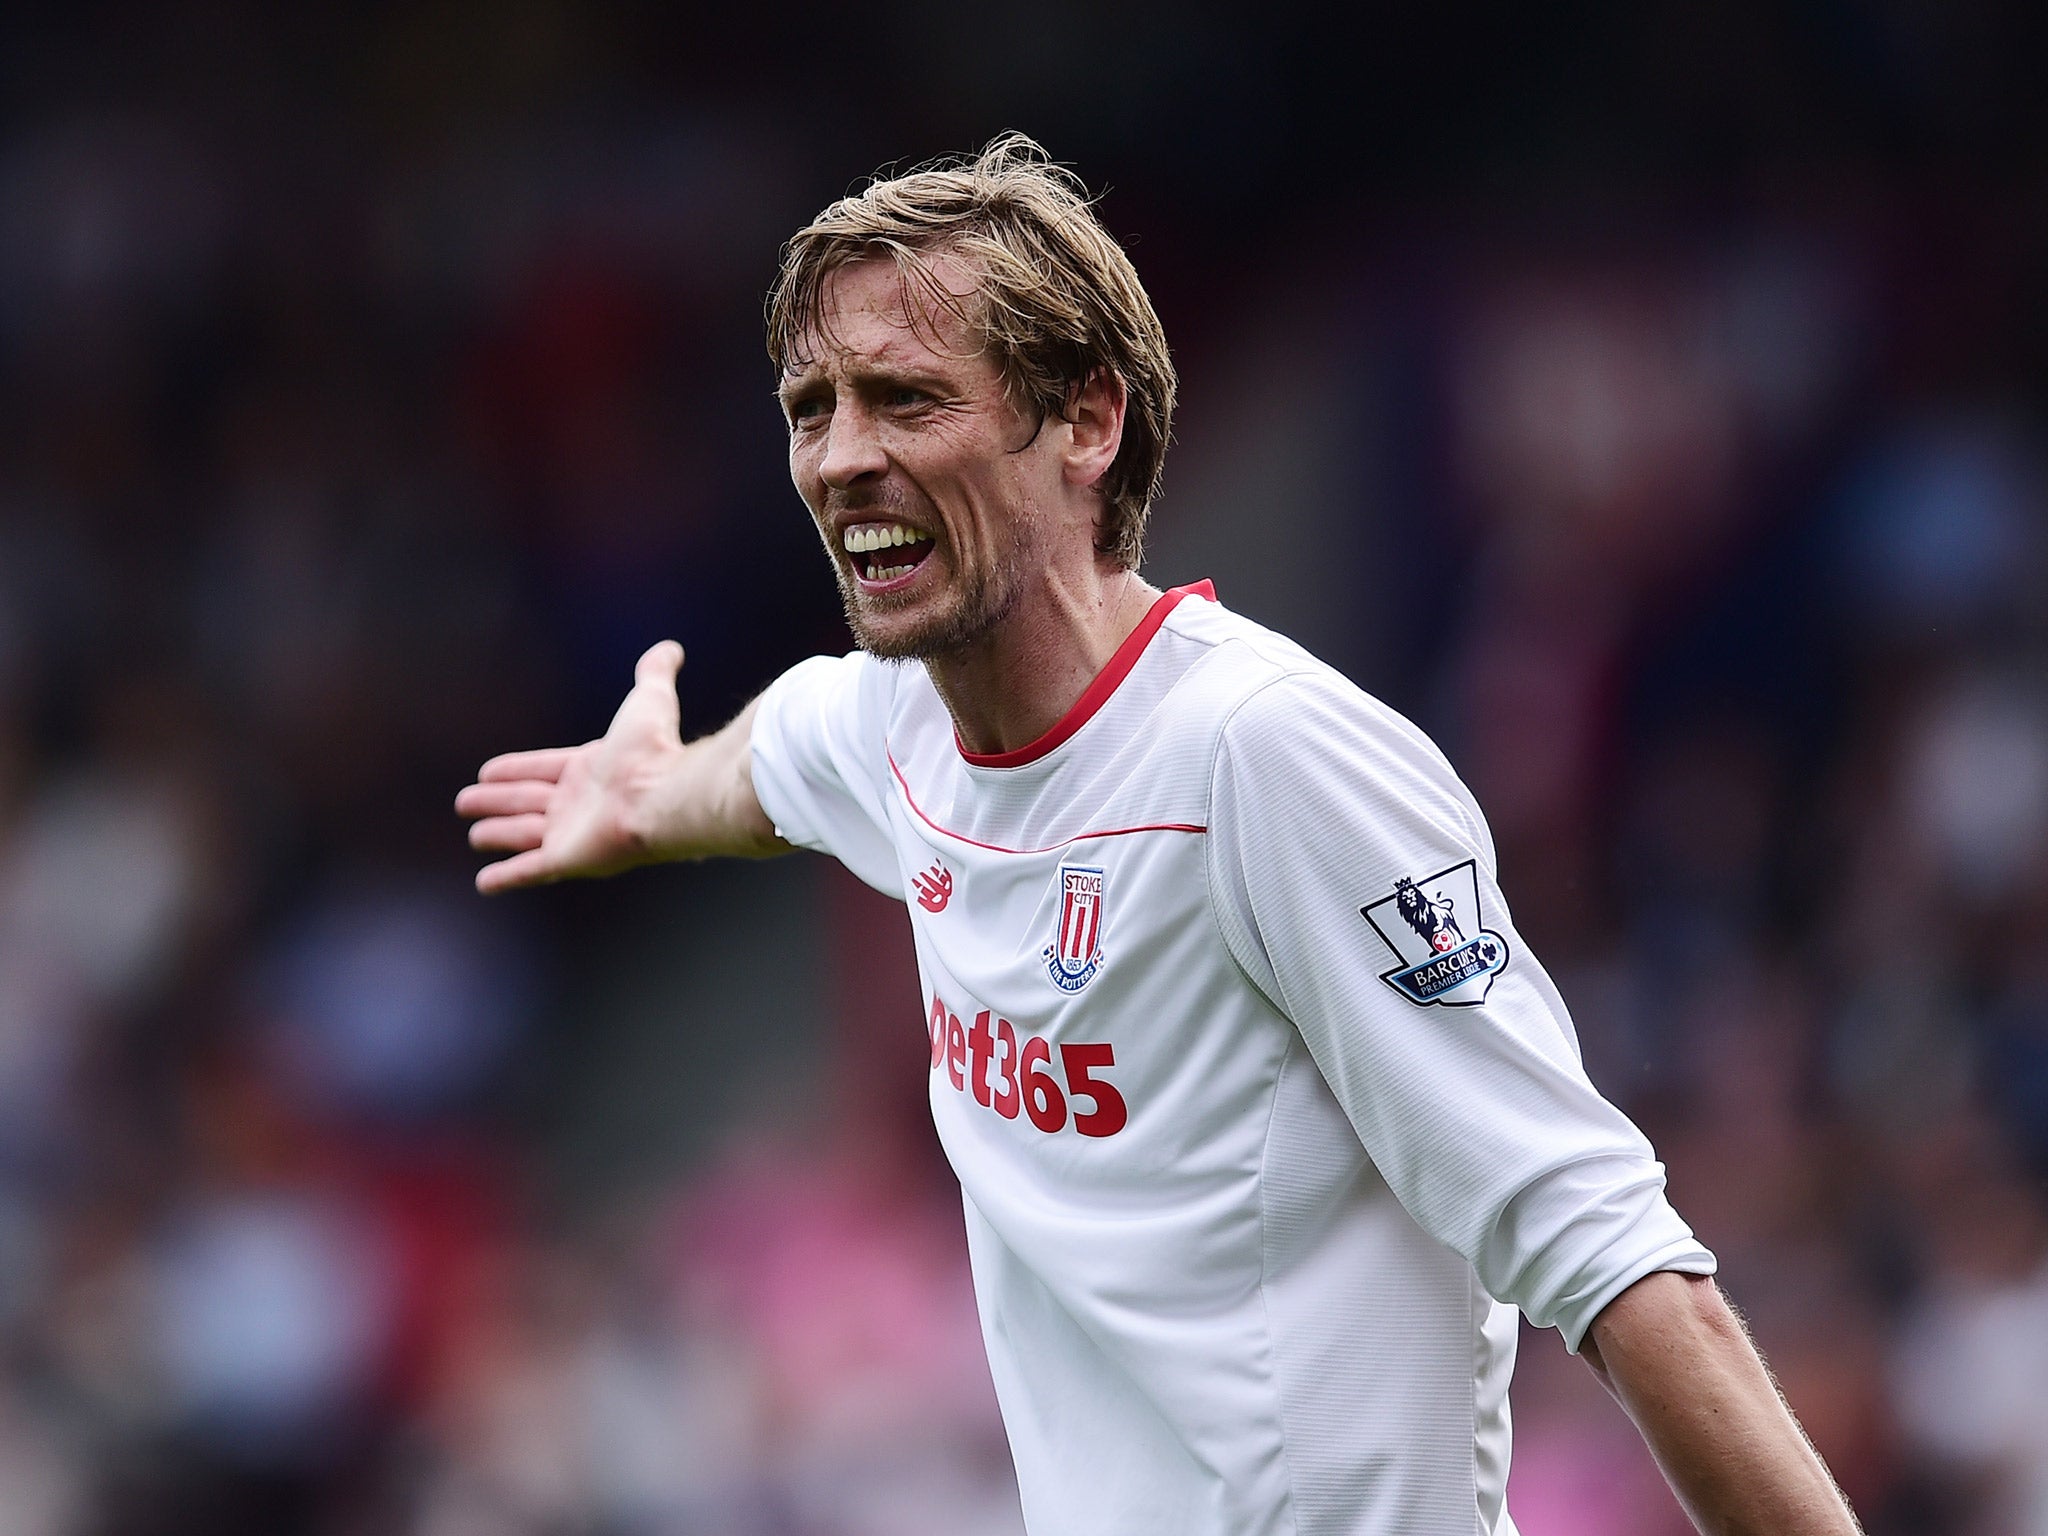 Peter Crouch was recently handed a one-year contract extension